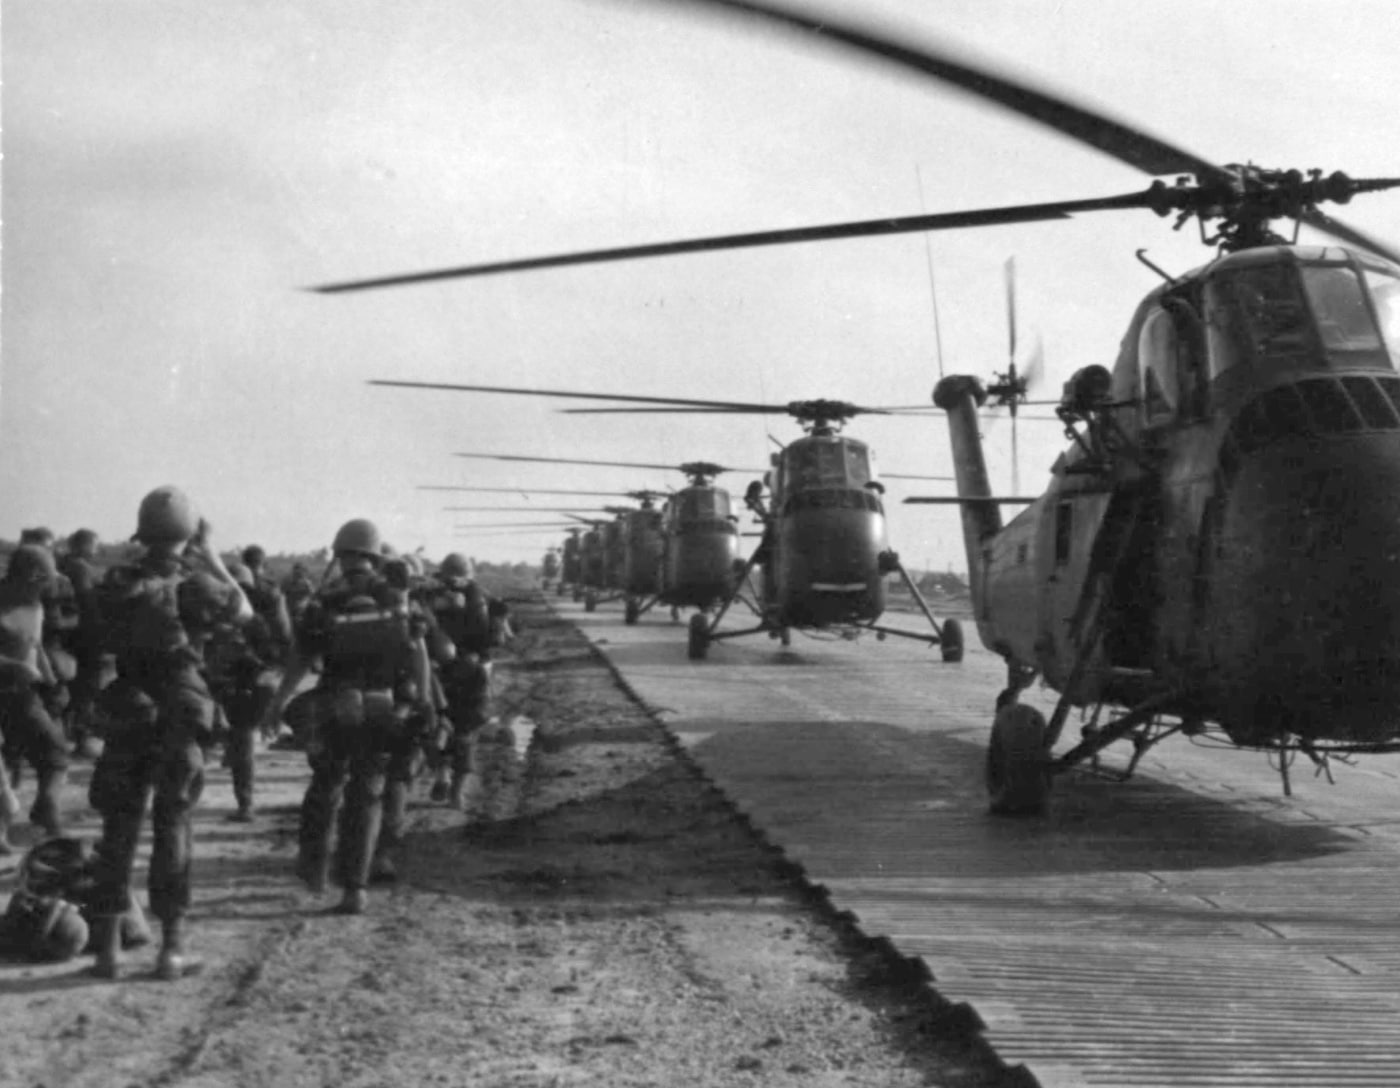 In this historical photo, we see a long line of UH-34 helicopters lined up on an improvised landing surface to transport Marine infantry on a search and destroy mission near Da Nang air base in Vietnam. Marine aviation units used the Sikorsky UH-34D Seahorse extensively for utility transport, medical evacuation and troop movements. 